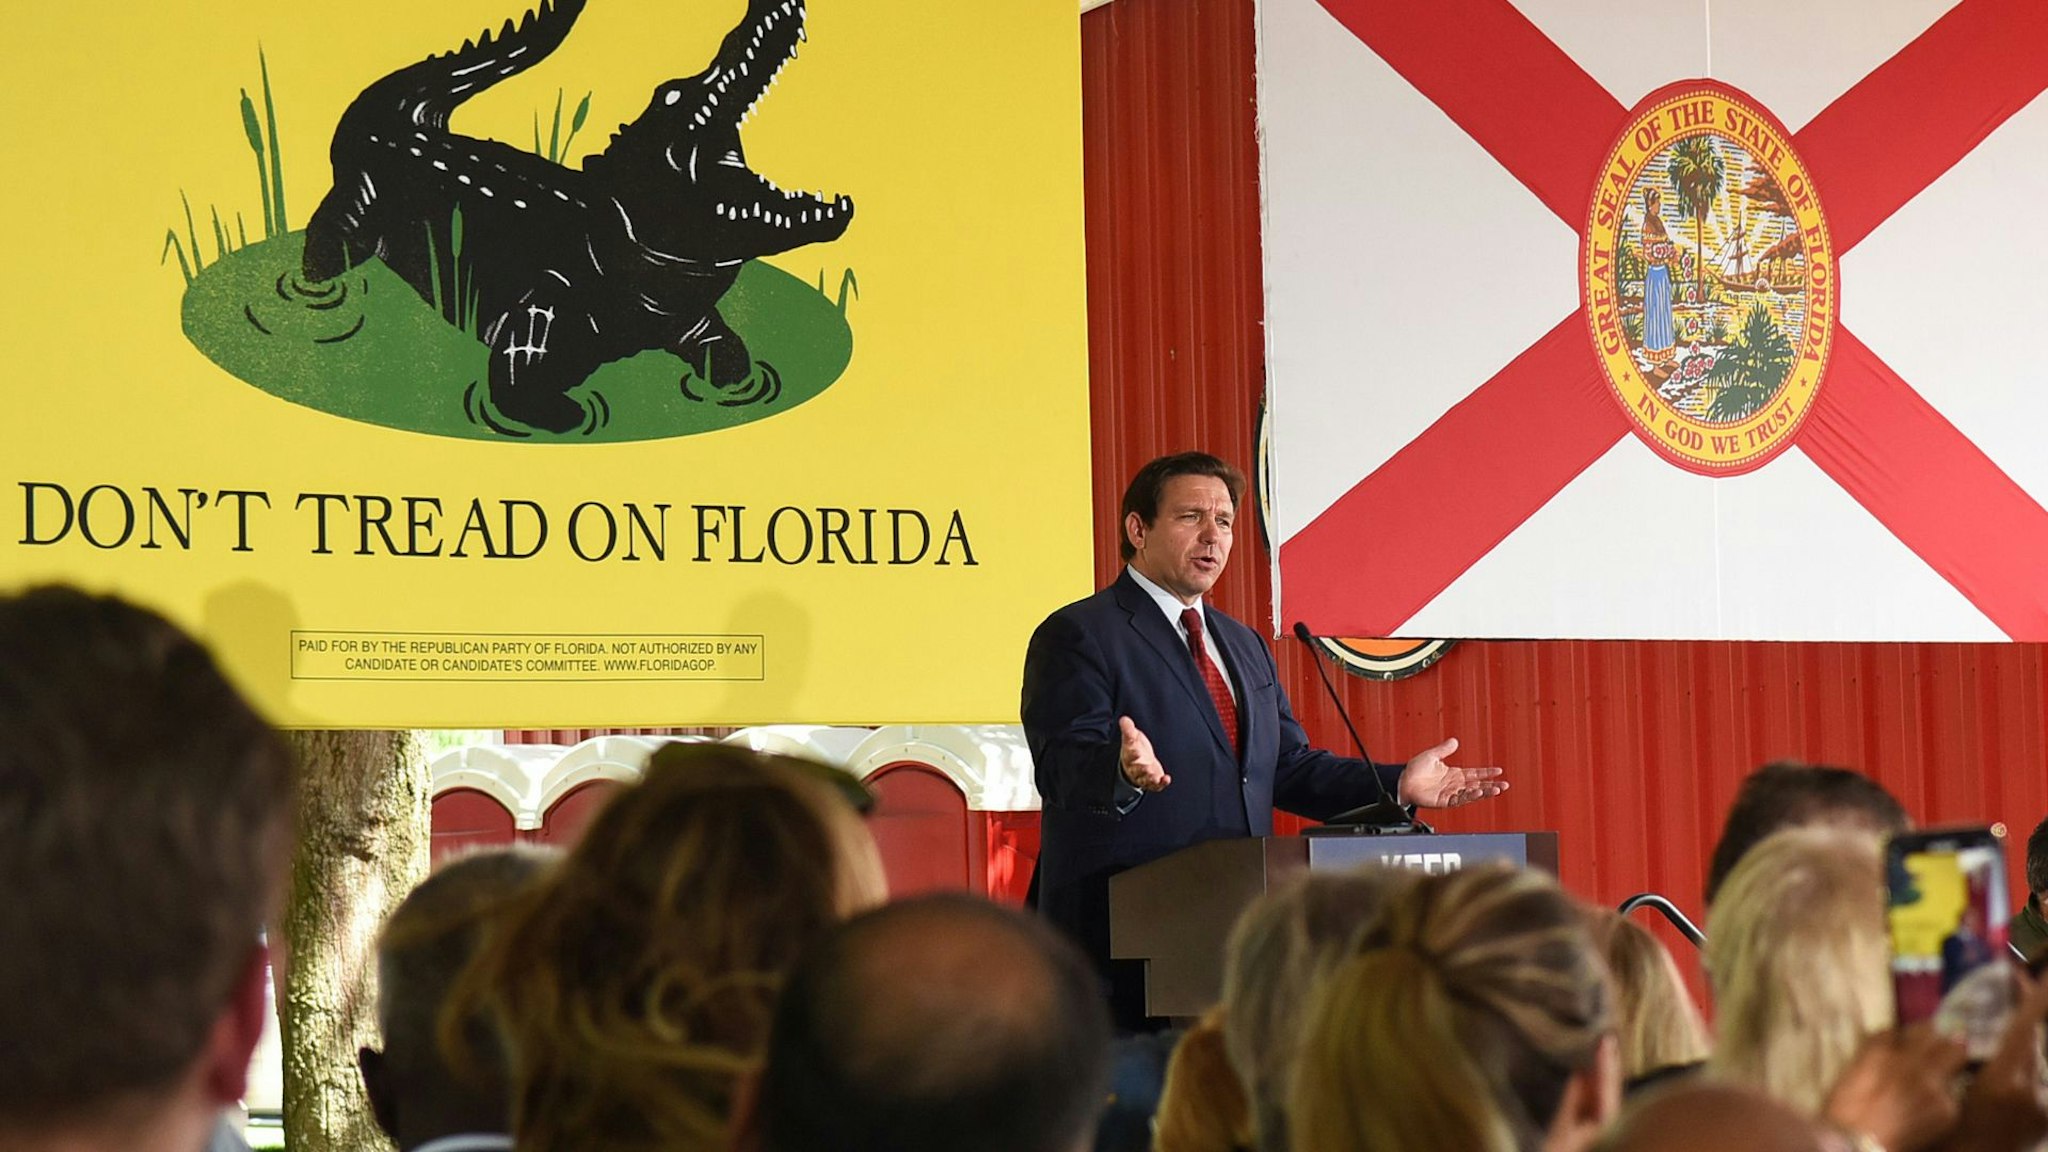 GENEVA, UNITED STATES - 2022/08/24: Florida Gov. Ron DeSantis speaks to supporters at a campaign stop on the Keep Florida Free Tour at the Horsepower Ranch in Geneva.